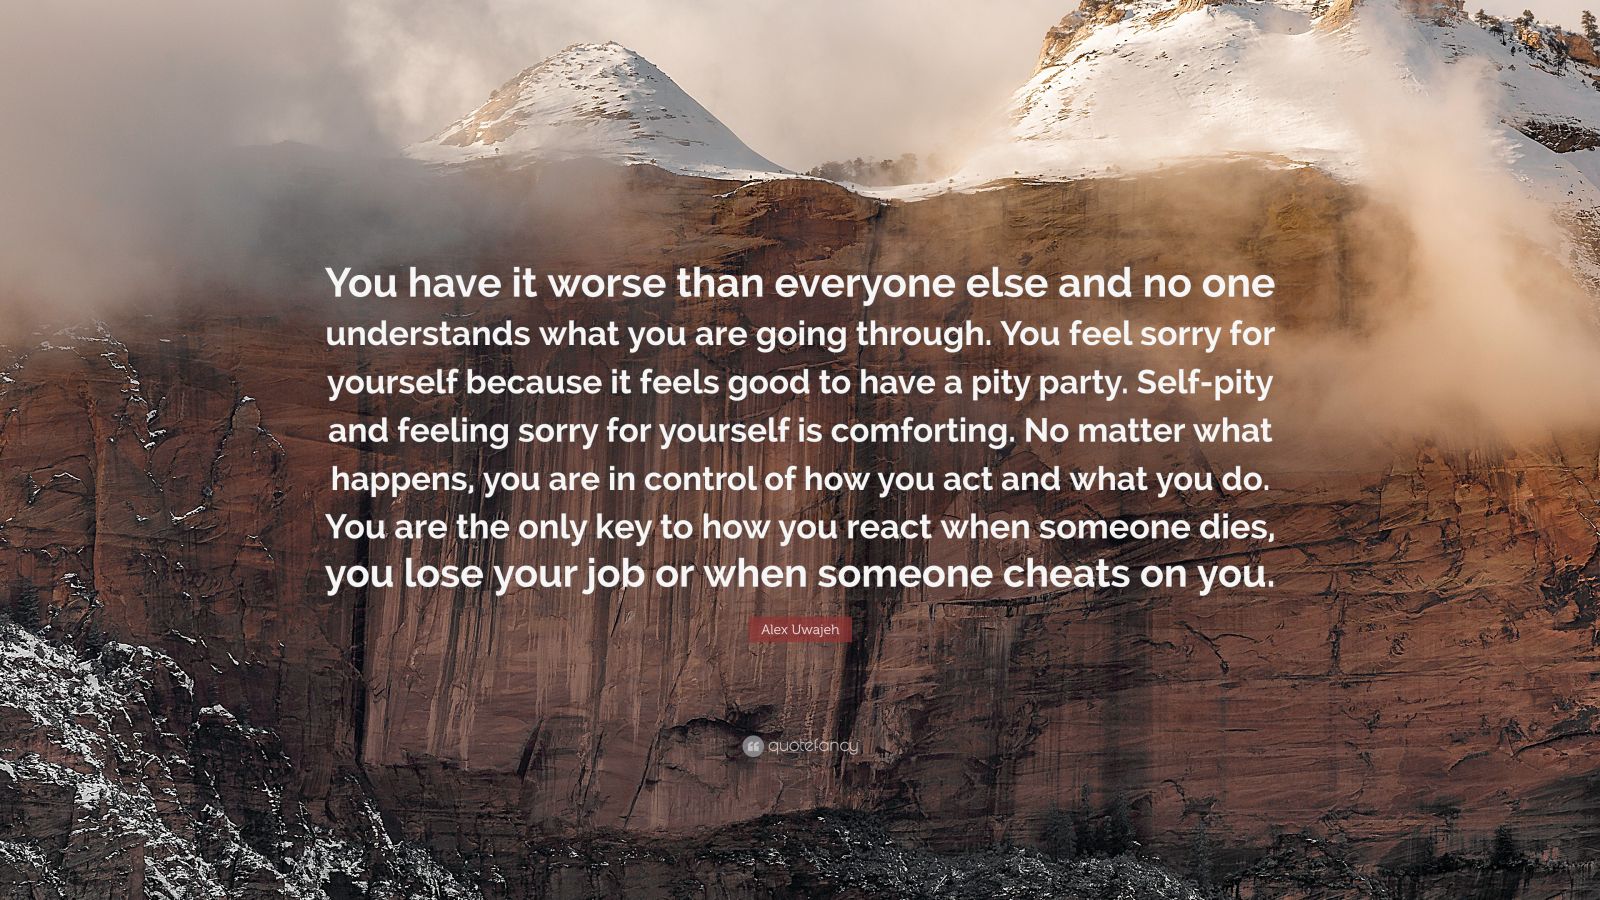 Alex Uwajeh Quote: “You have it worse than everyone else and no one ...